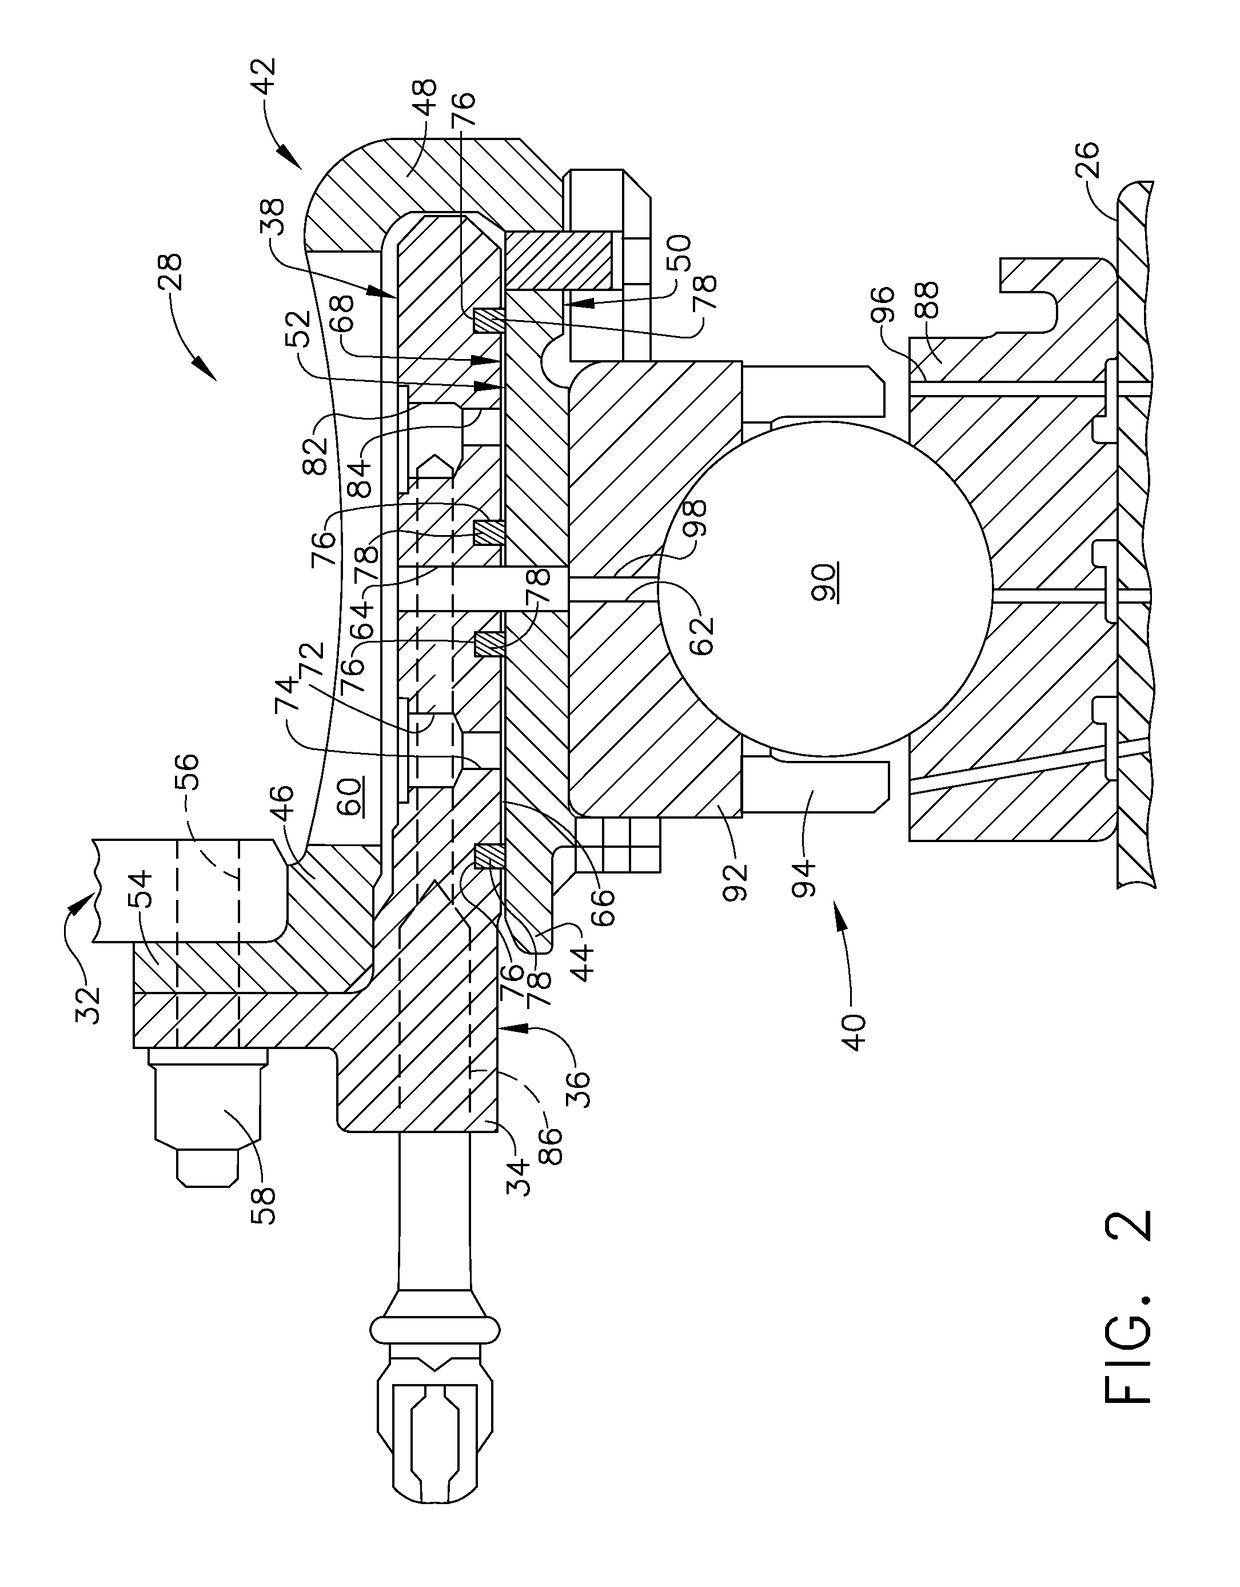 Bearing with drained race and squeeze film damper